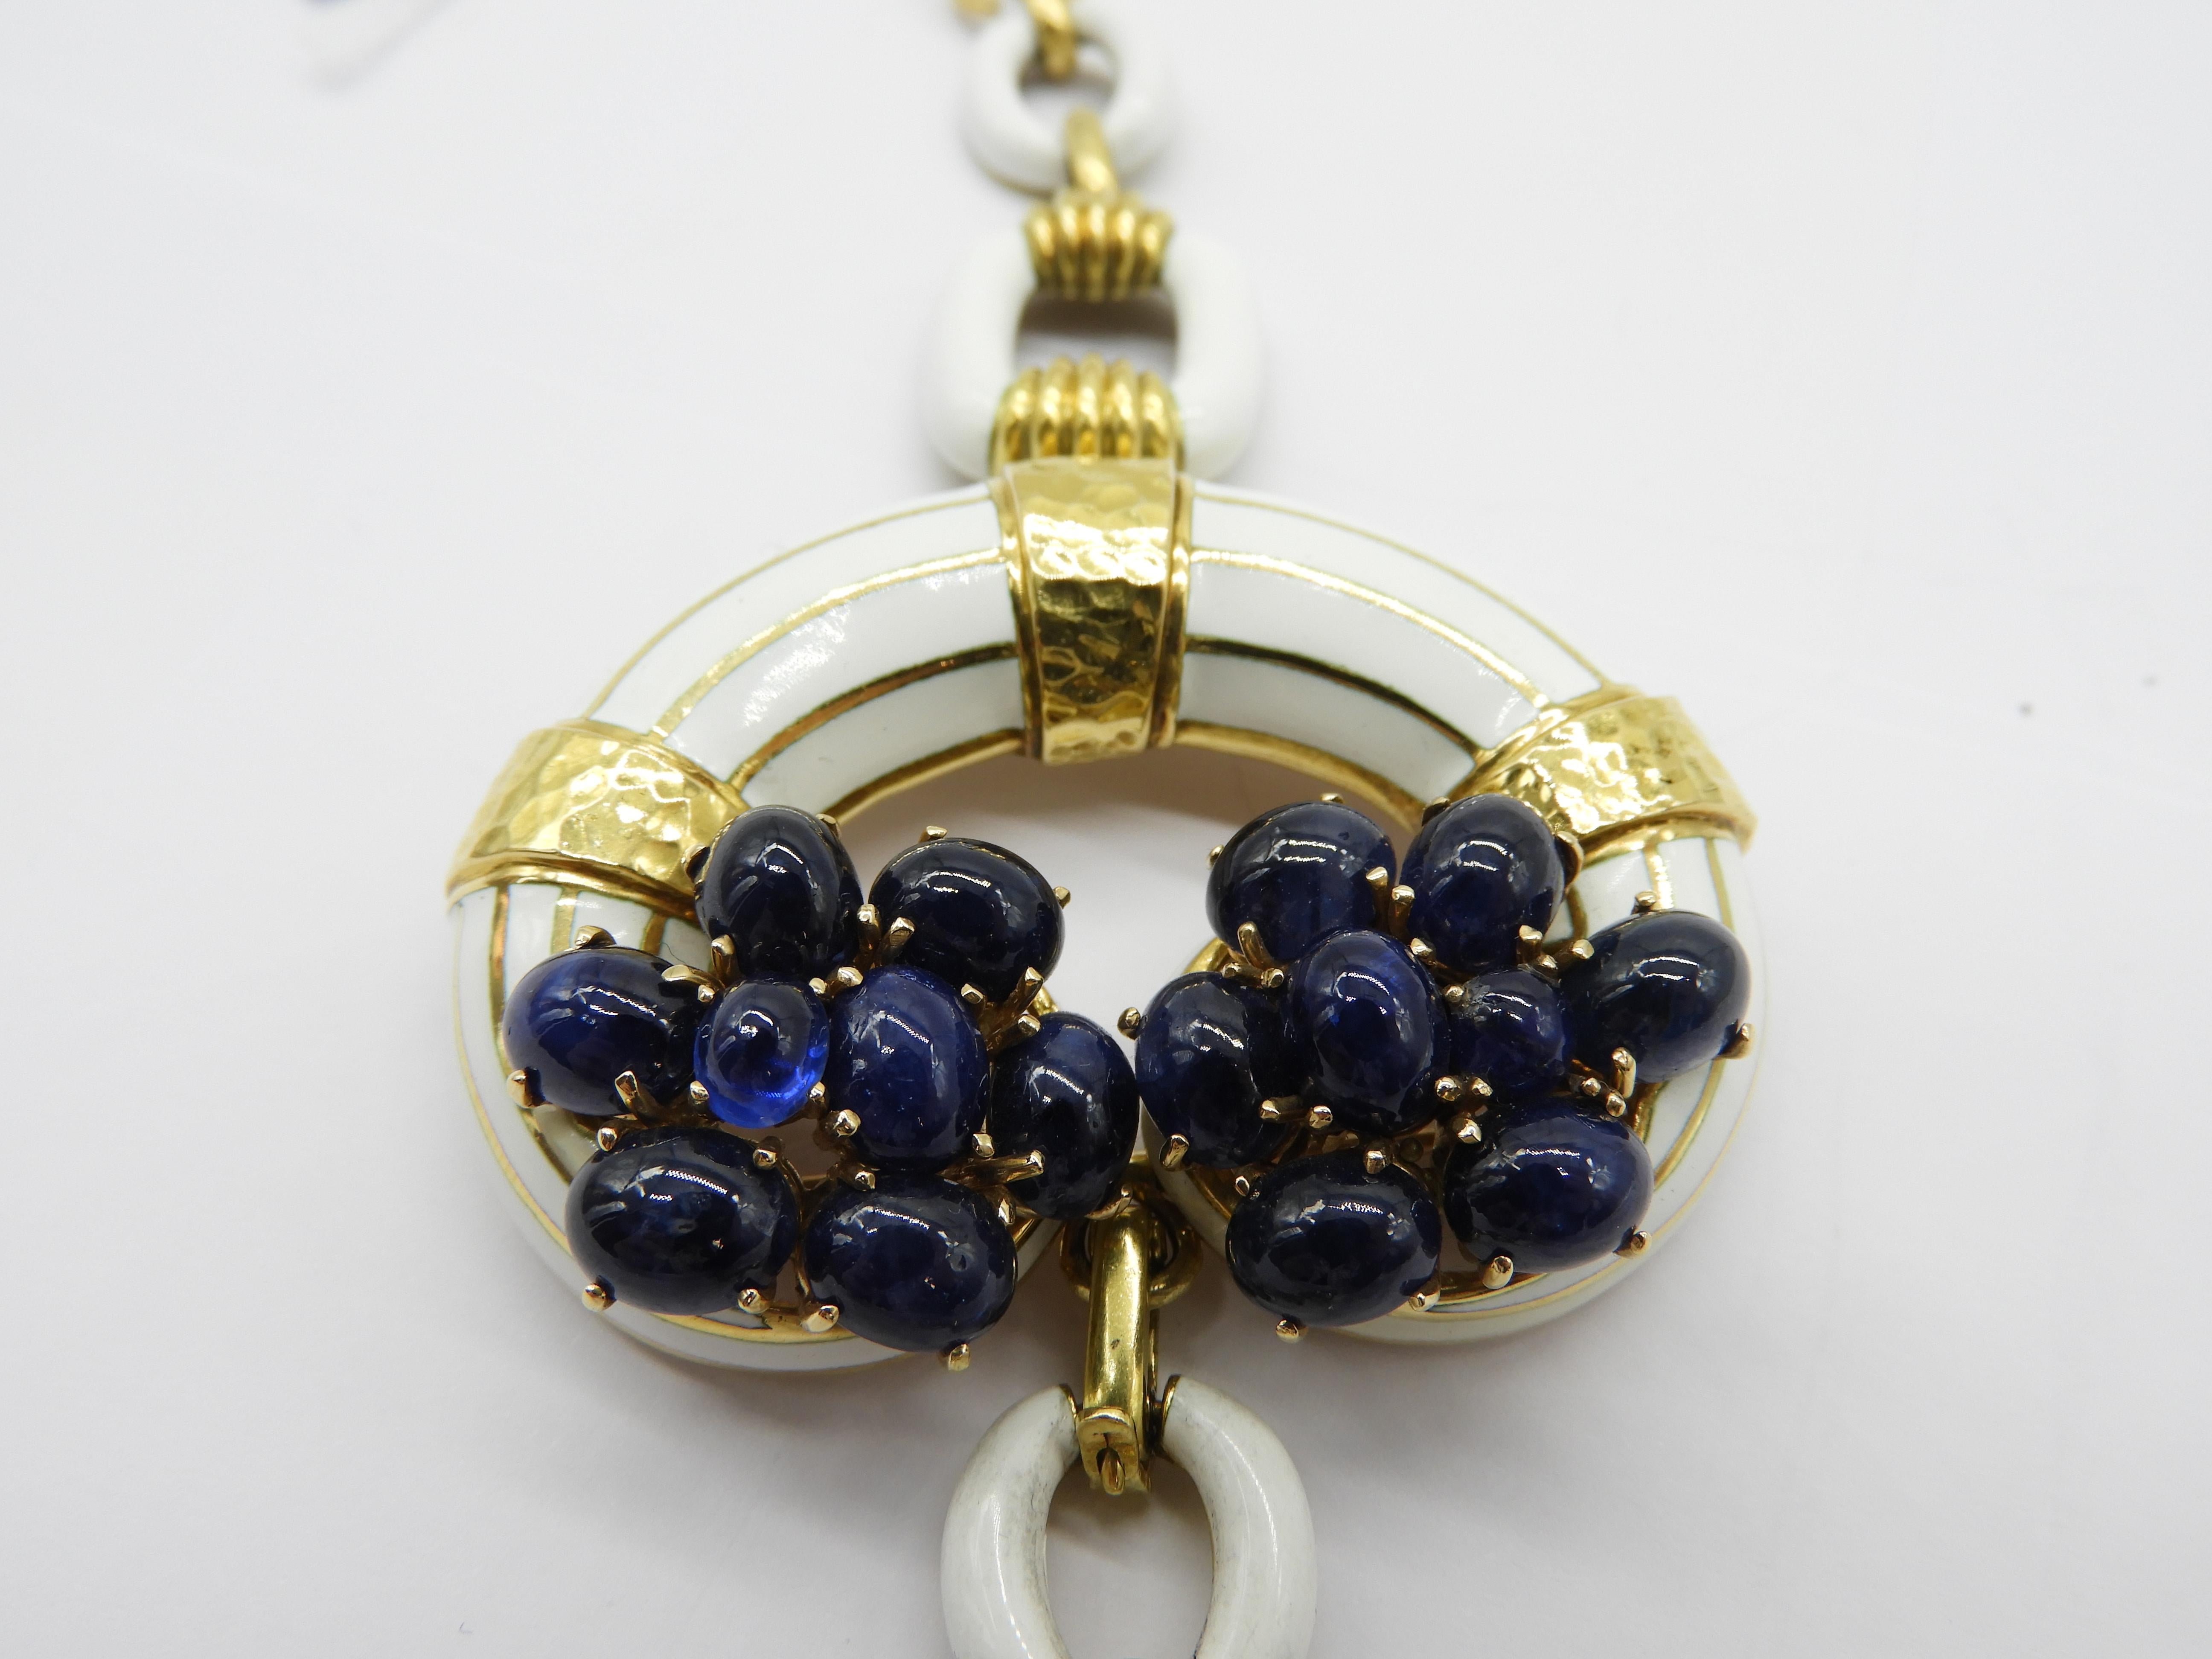 DAVID WEBB
Sapphire Cabochon and enamel link bracelet  with a central C in 18k gold and convertible into brooche. 
DAVID WEBB (USA, 1925–75)
“Women are tired of jewelry-looking jewelry,” celebrated American designer David Webb once noted. In